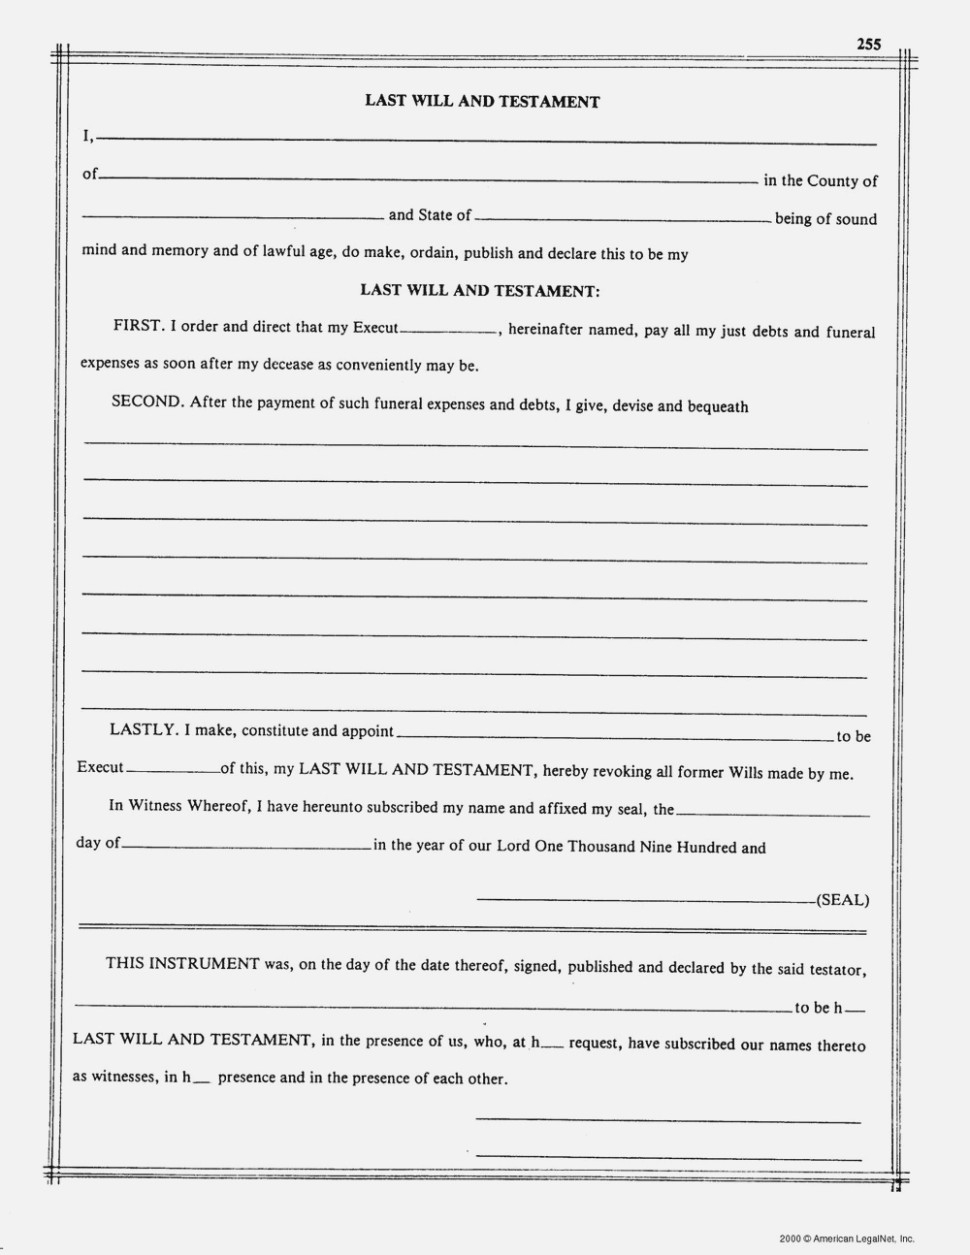 Free Printable Last Will And Testament Forms Nz | Resume Examples - Free Printable Last Will And Testament Blank Forms